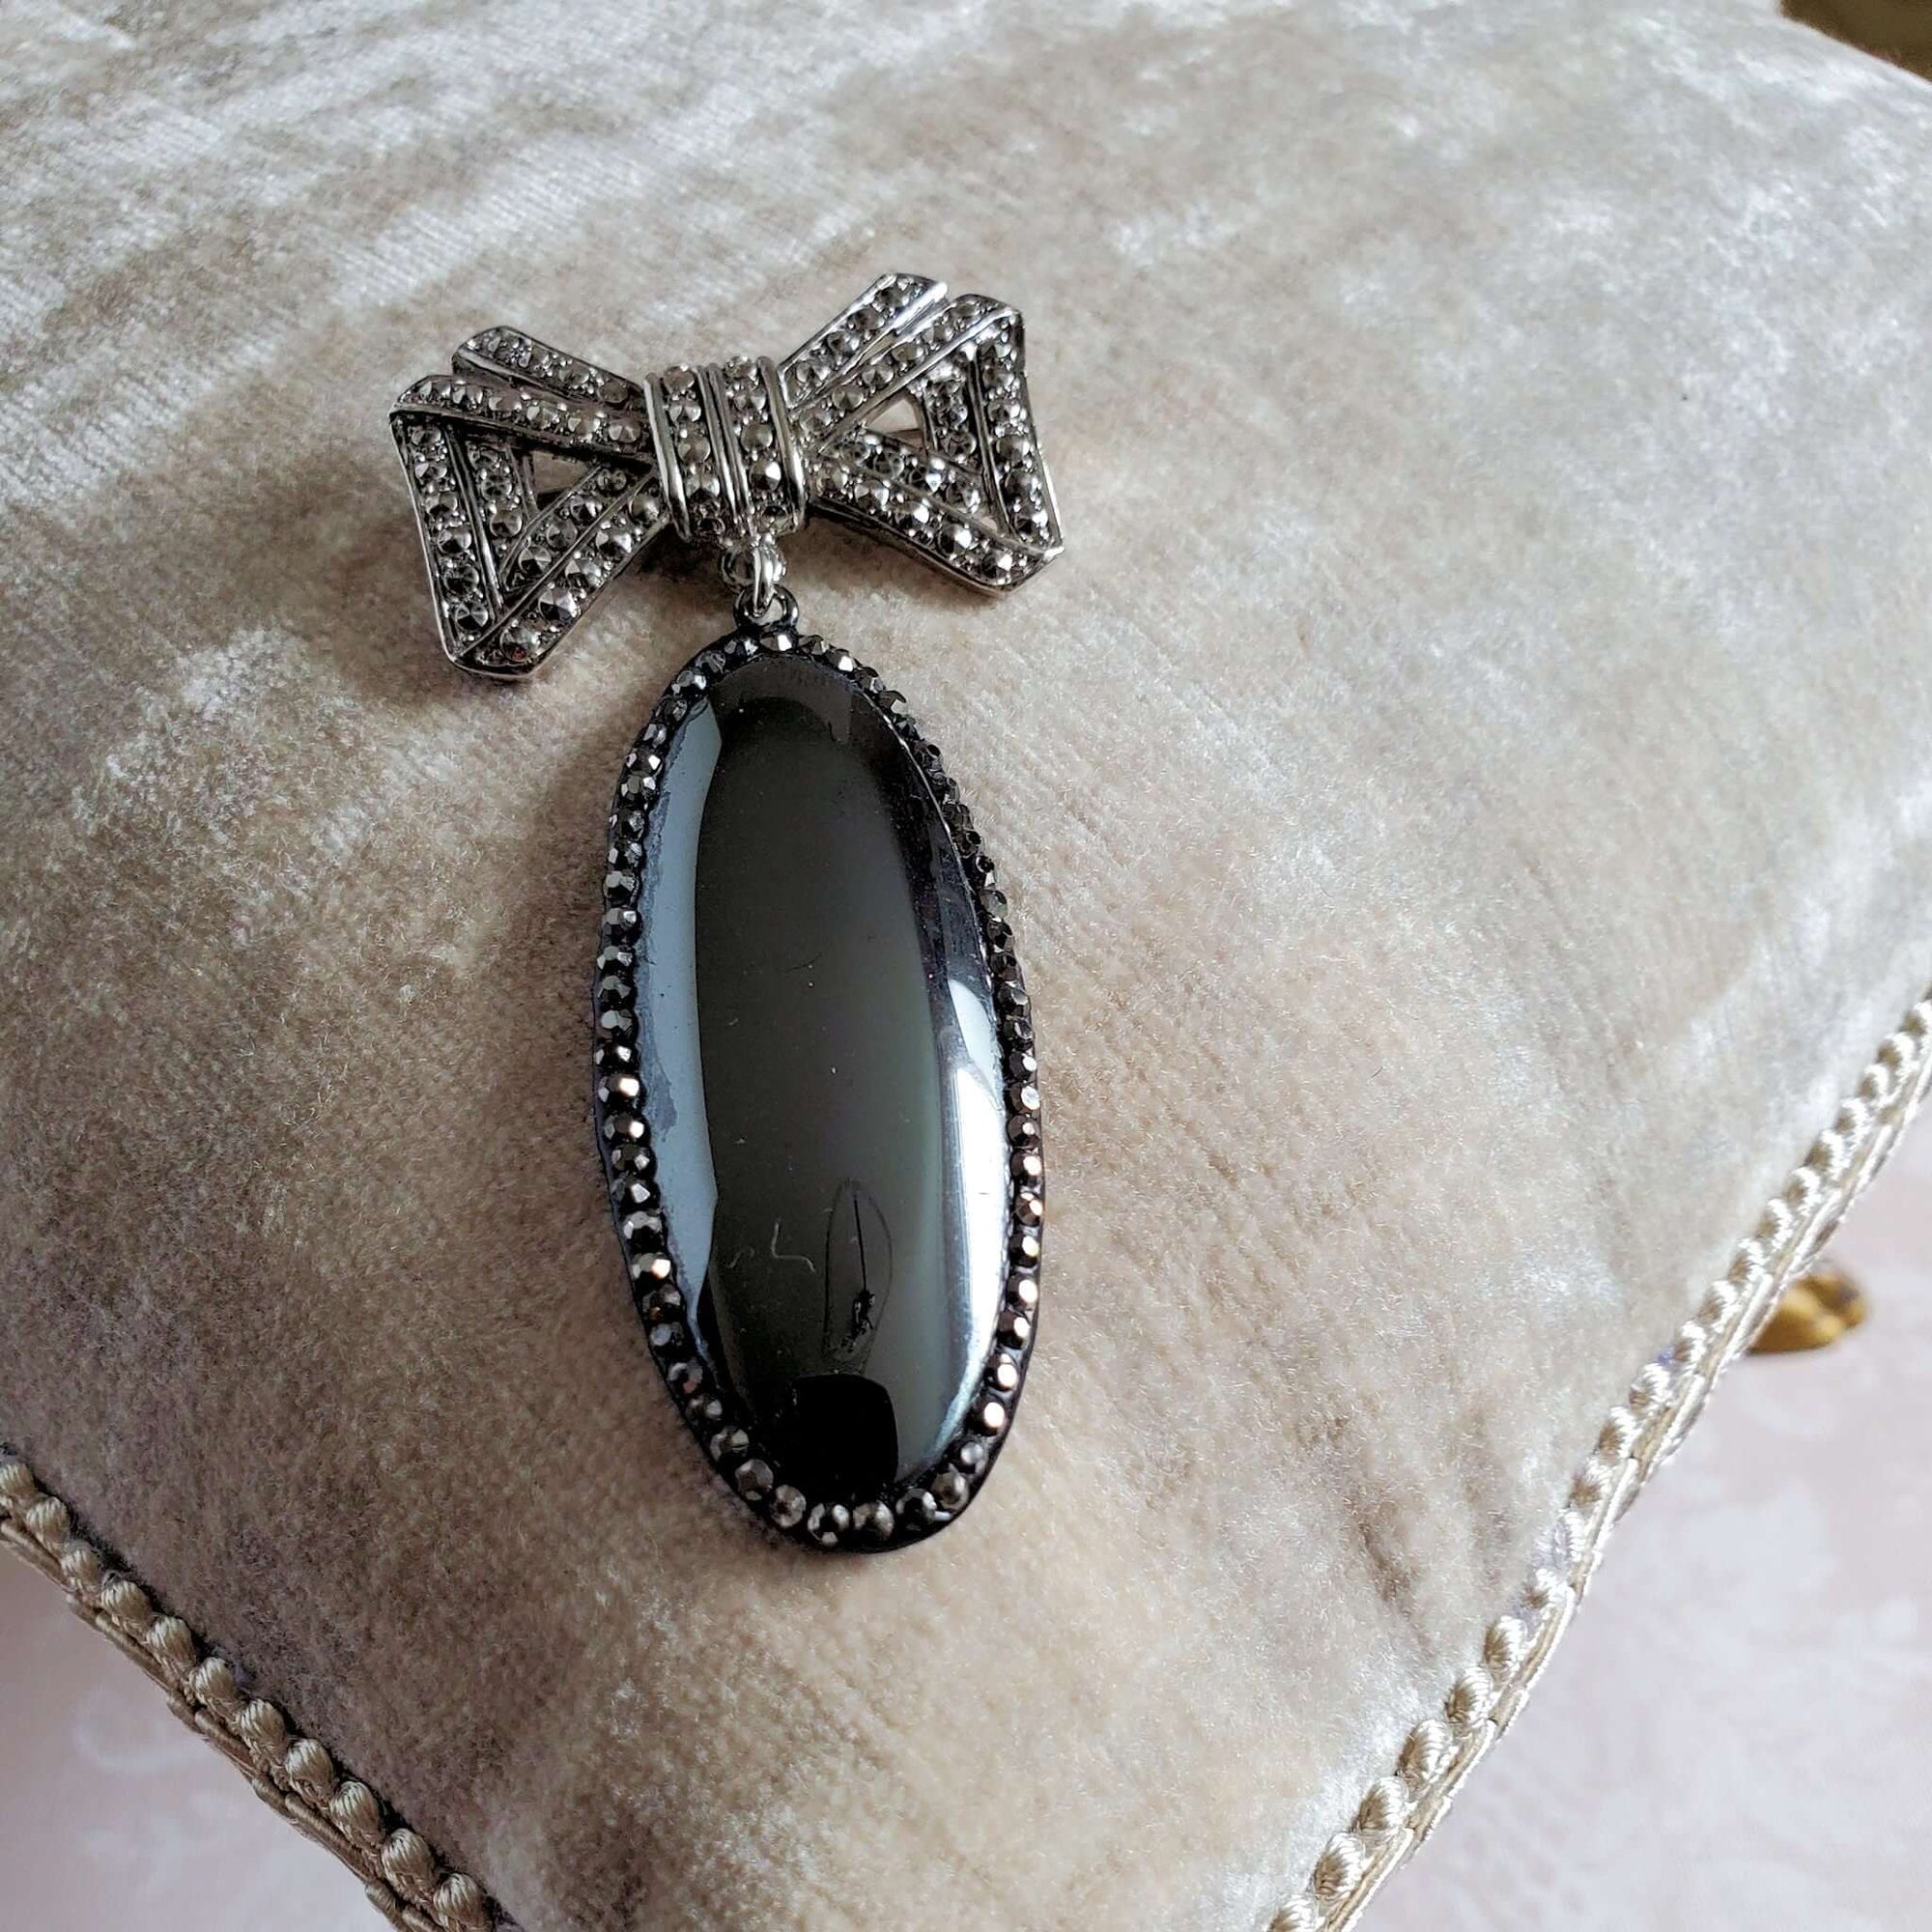 Marcasite Bow Brooch with Large Black Oval Stone Pendant